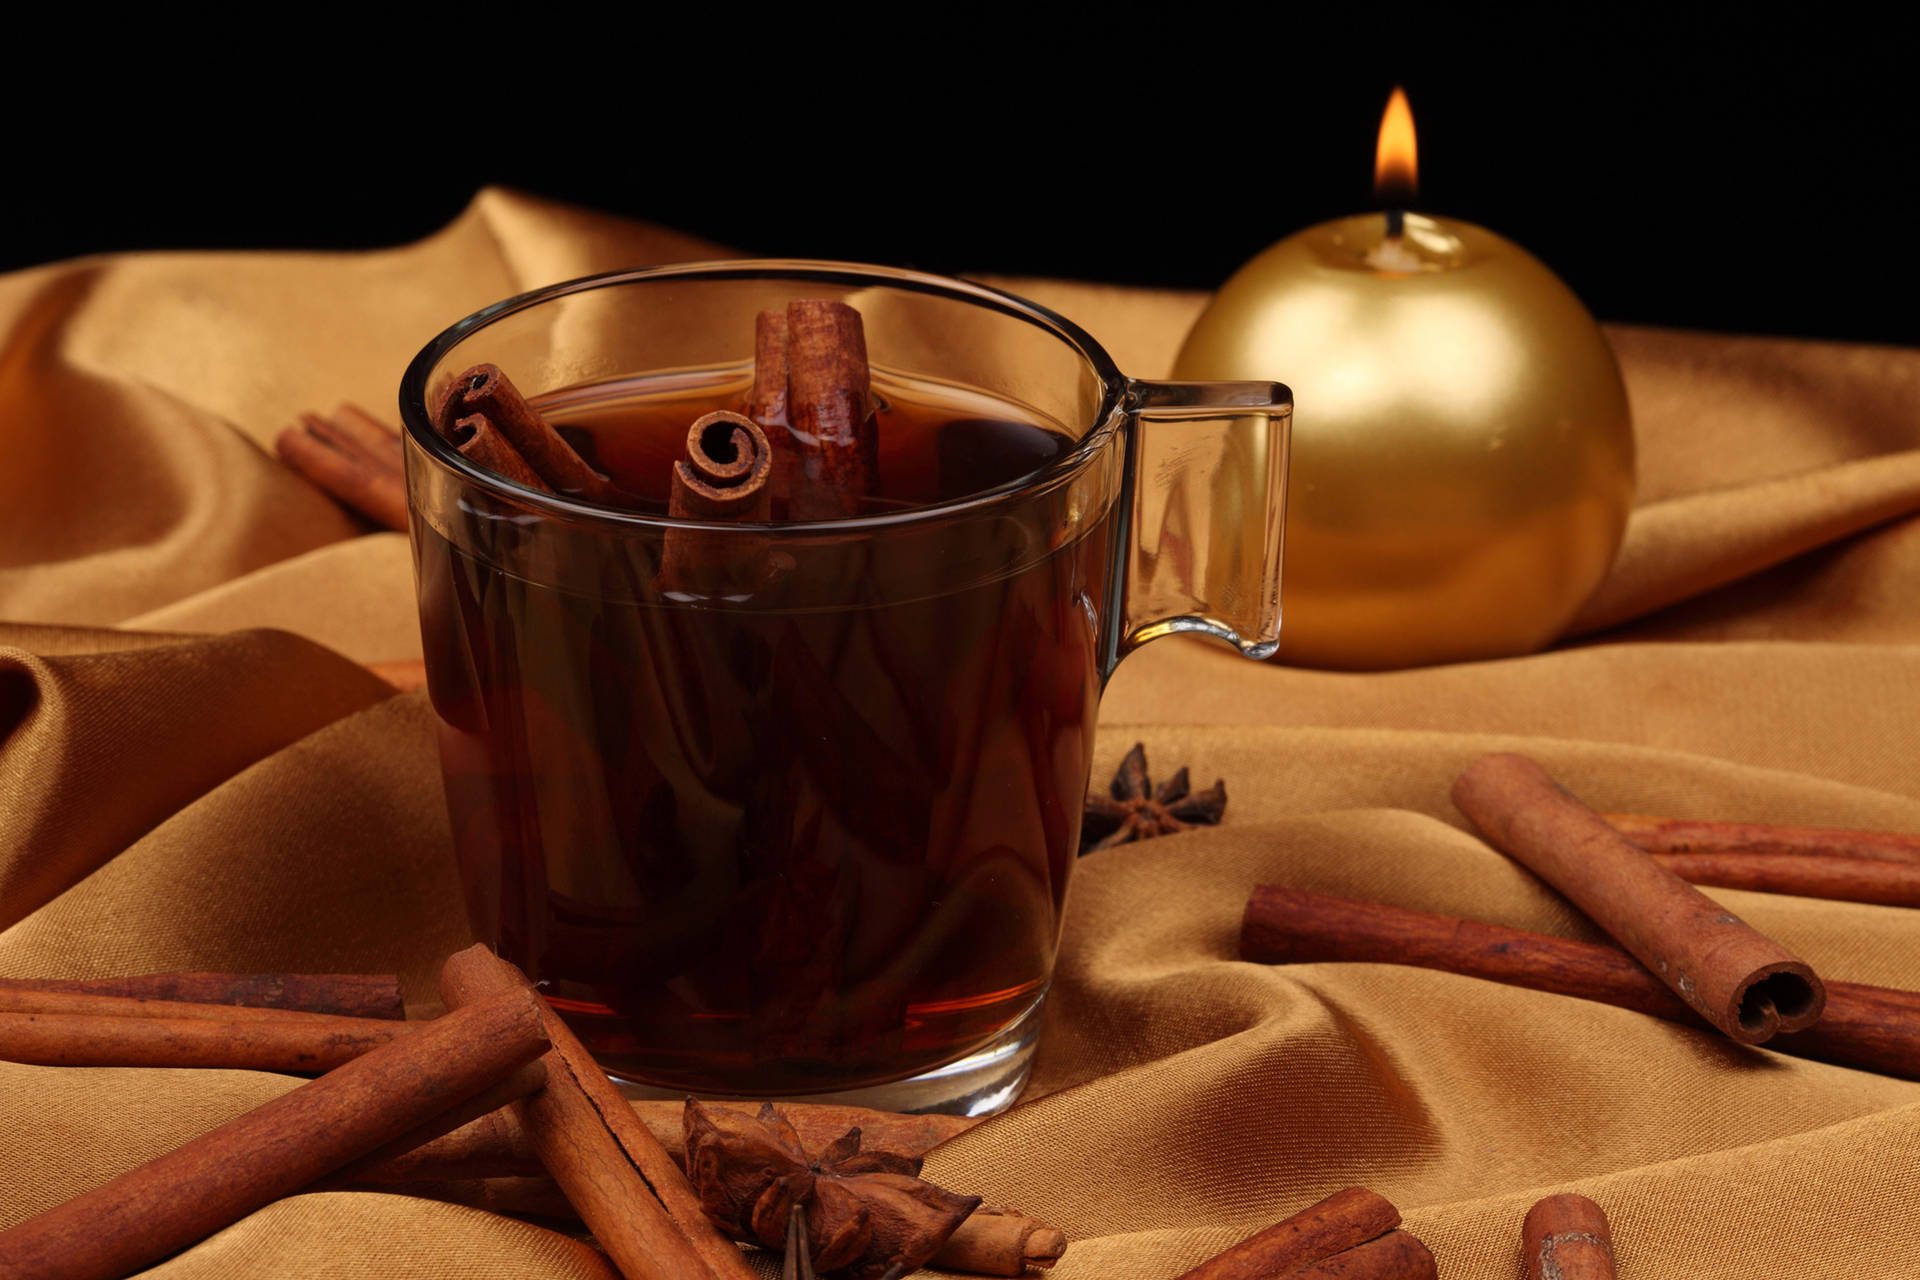 New Year's Cinnamon Tea And Candle